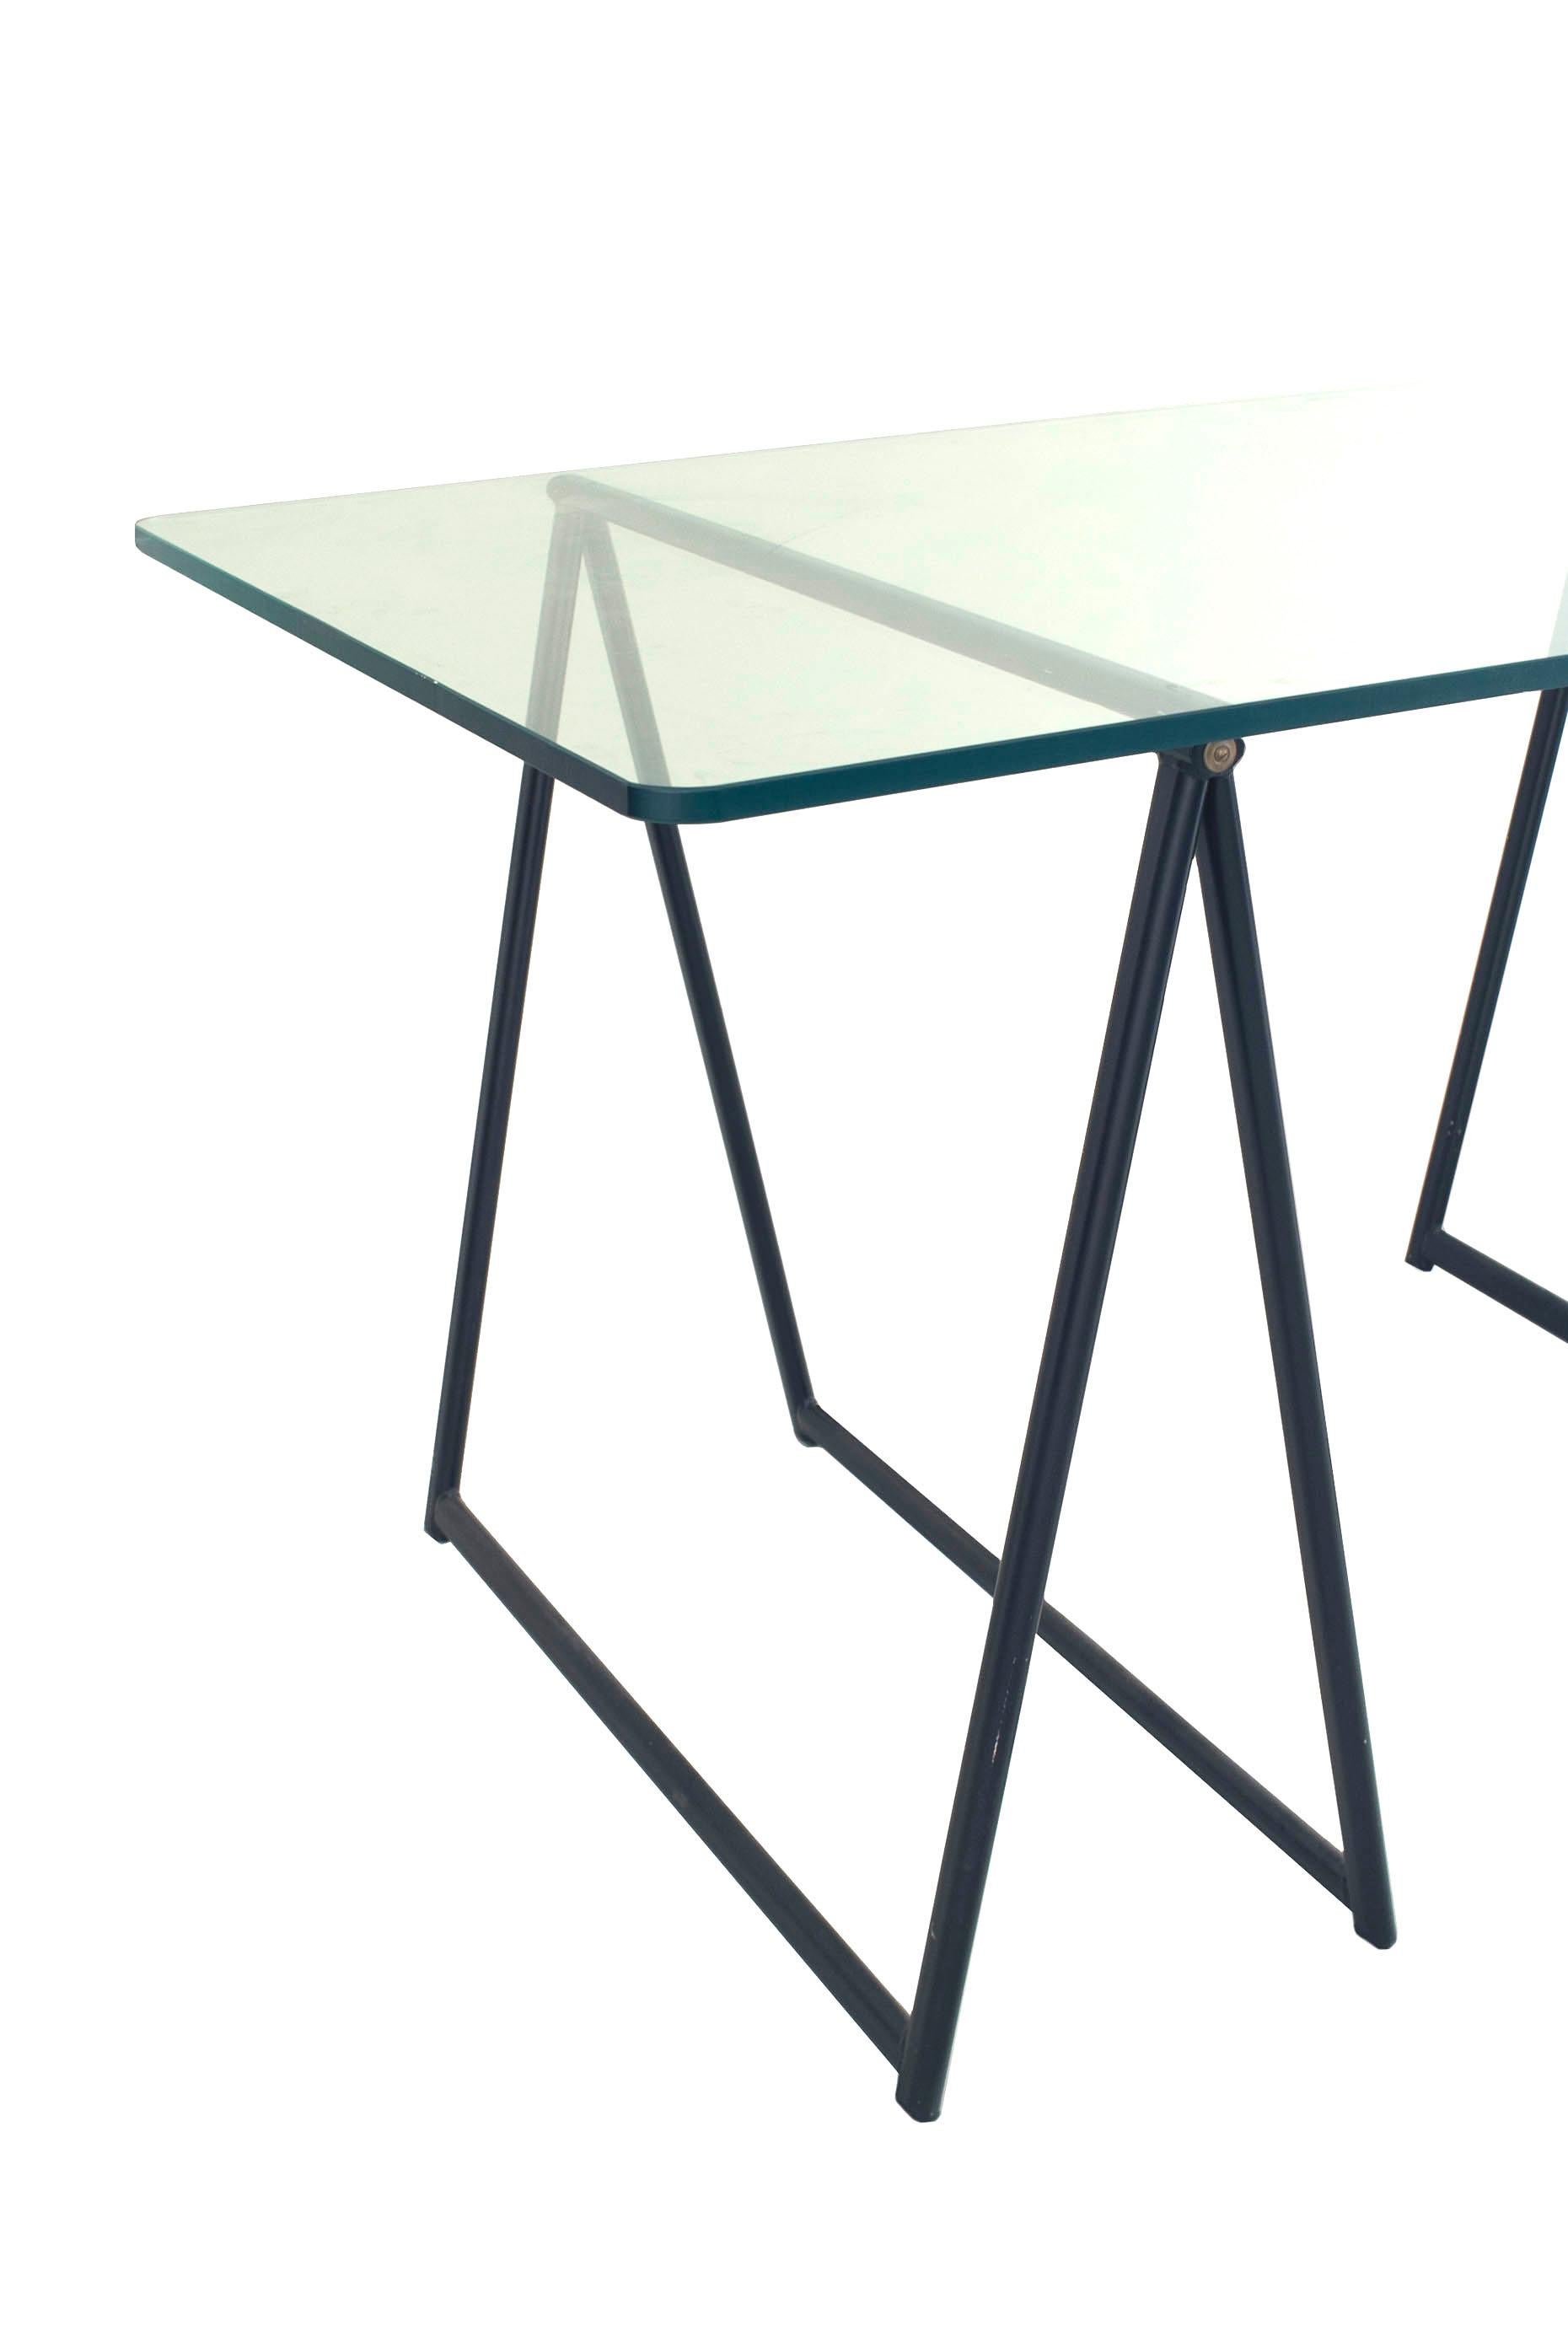 French Campaign style Post-War Design sawbuck design table desk with 2 ebonized metal bases supporting a rectangular glass top. (attributed to JANSEN)
